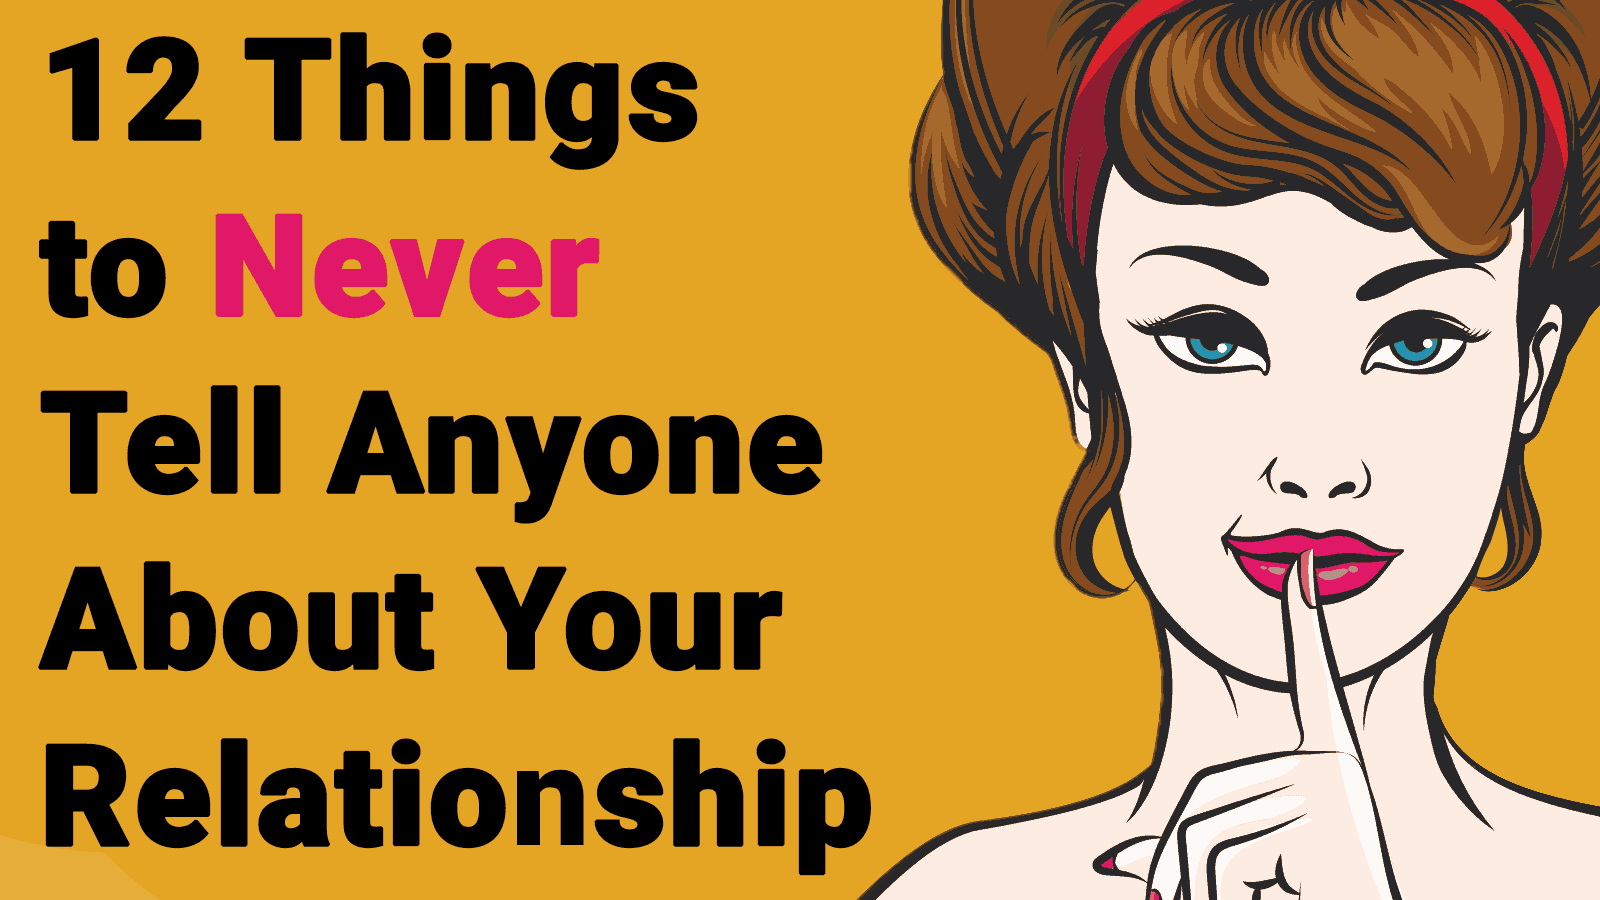 12 Things to Never Tell Anyone About Your Relationship